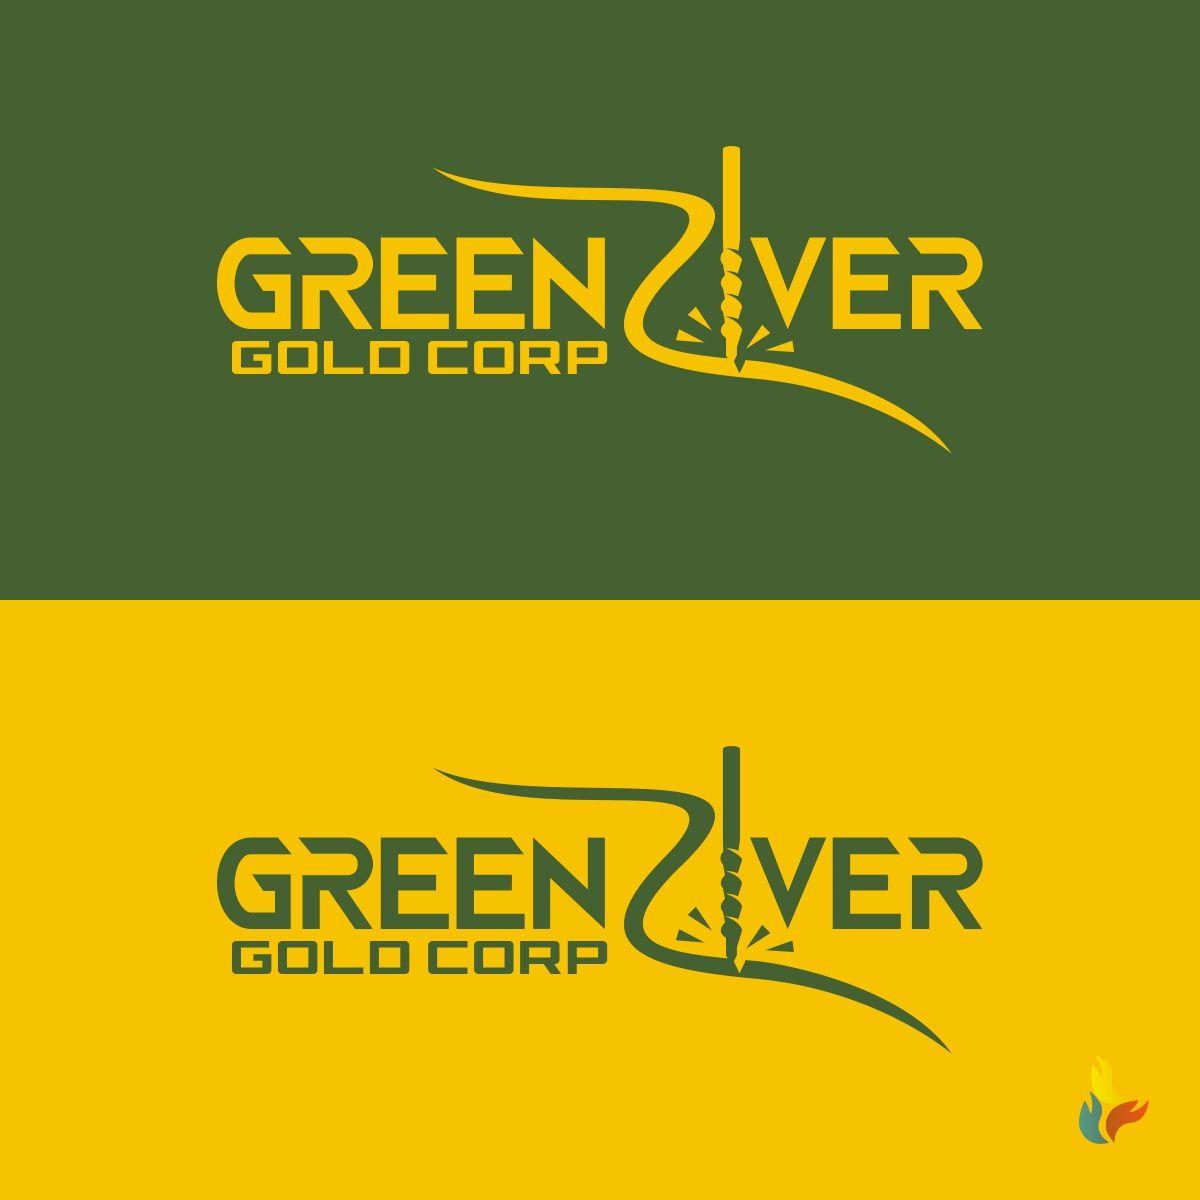 Yellow Corp Logo - Professional, Bold, It Company Logo Design for Green River Gold Corp ...